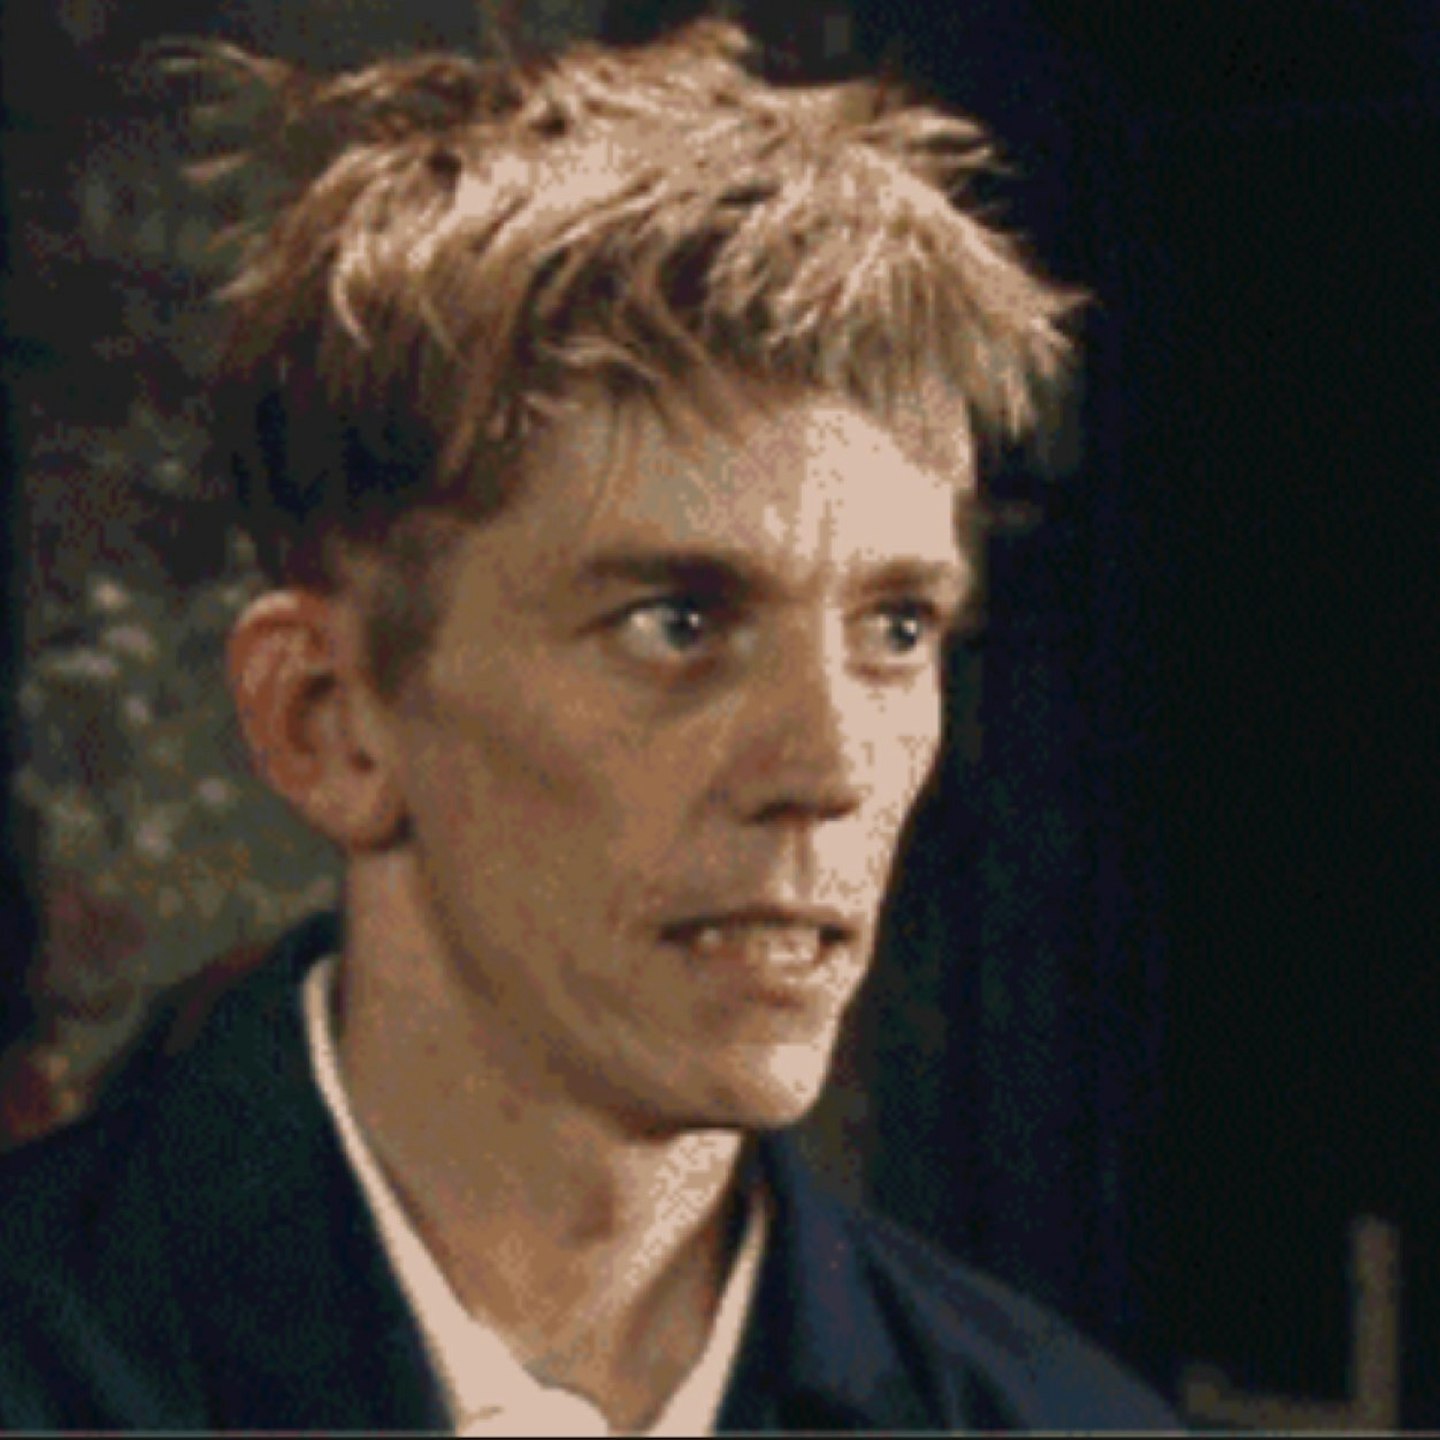 Munch played by Lee Oakes